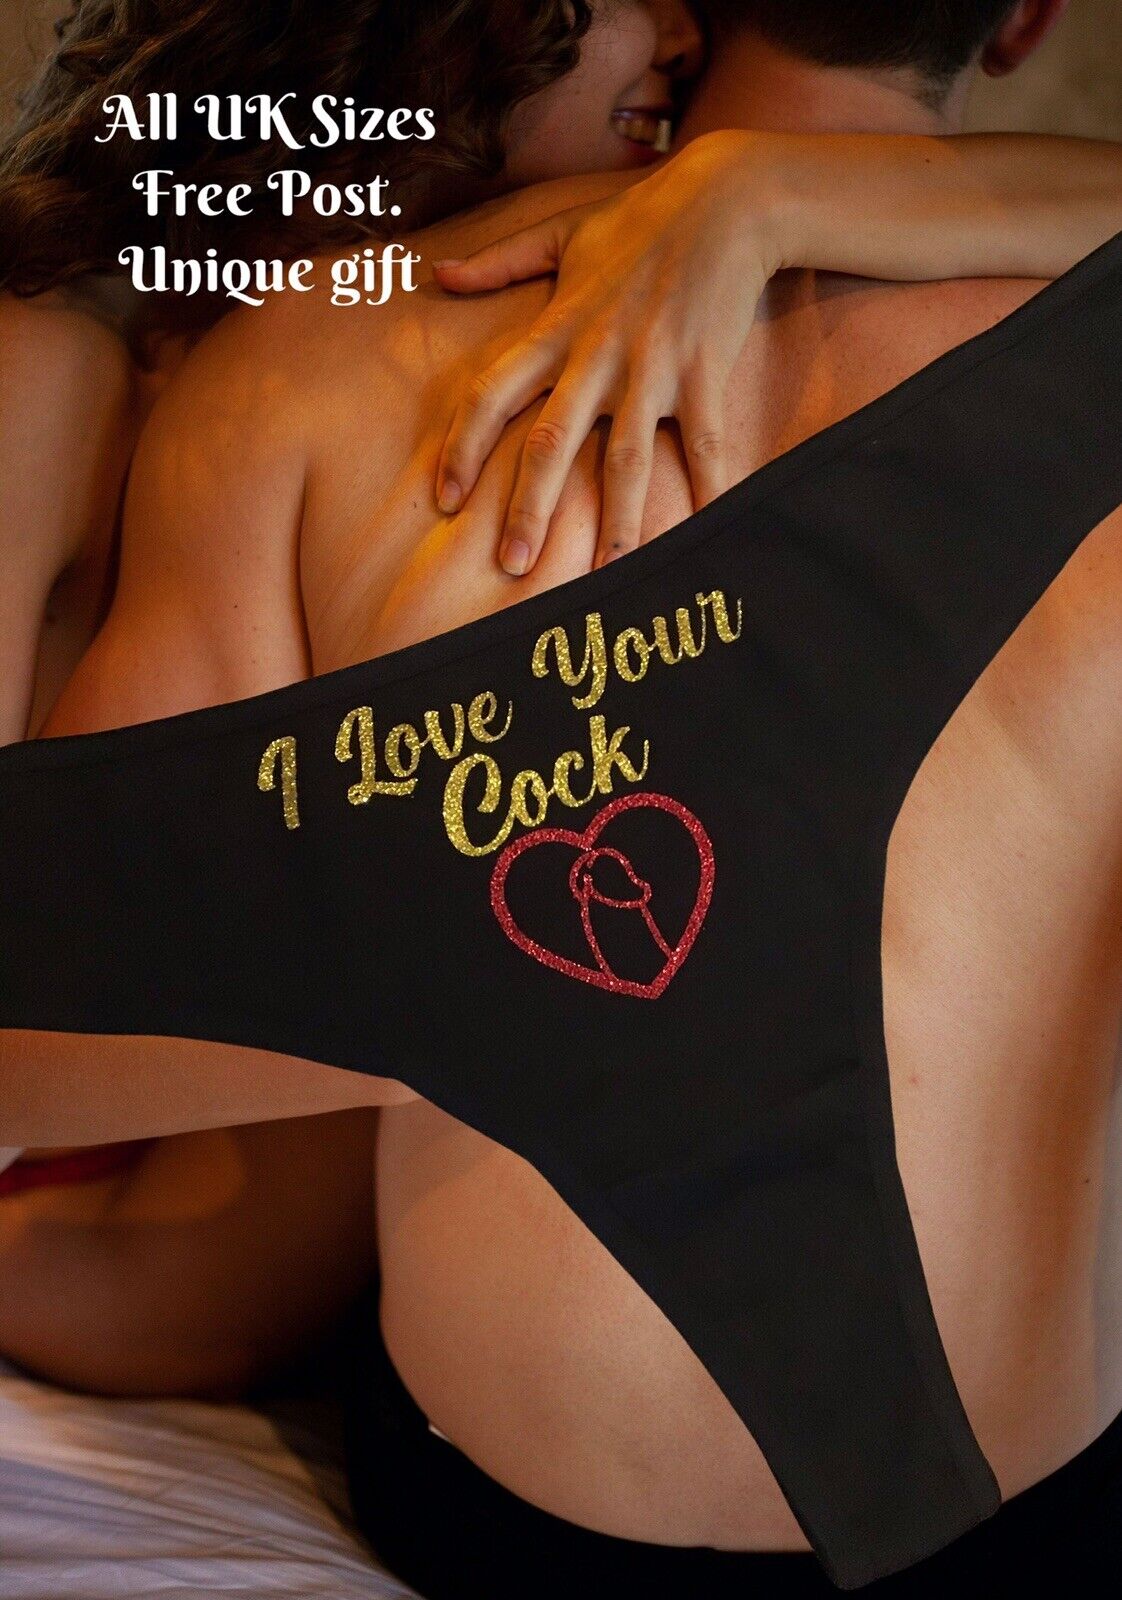 christina krauss recommends i love your cock pic